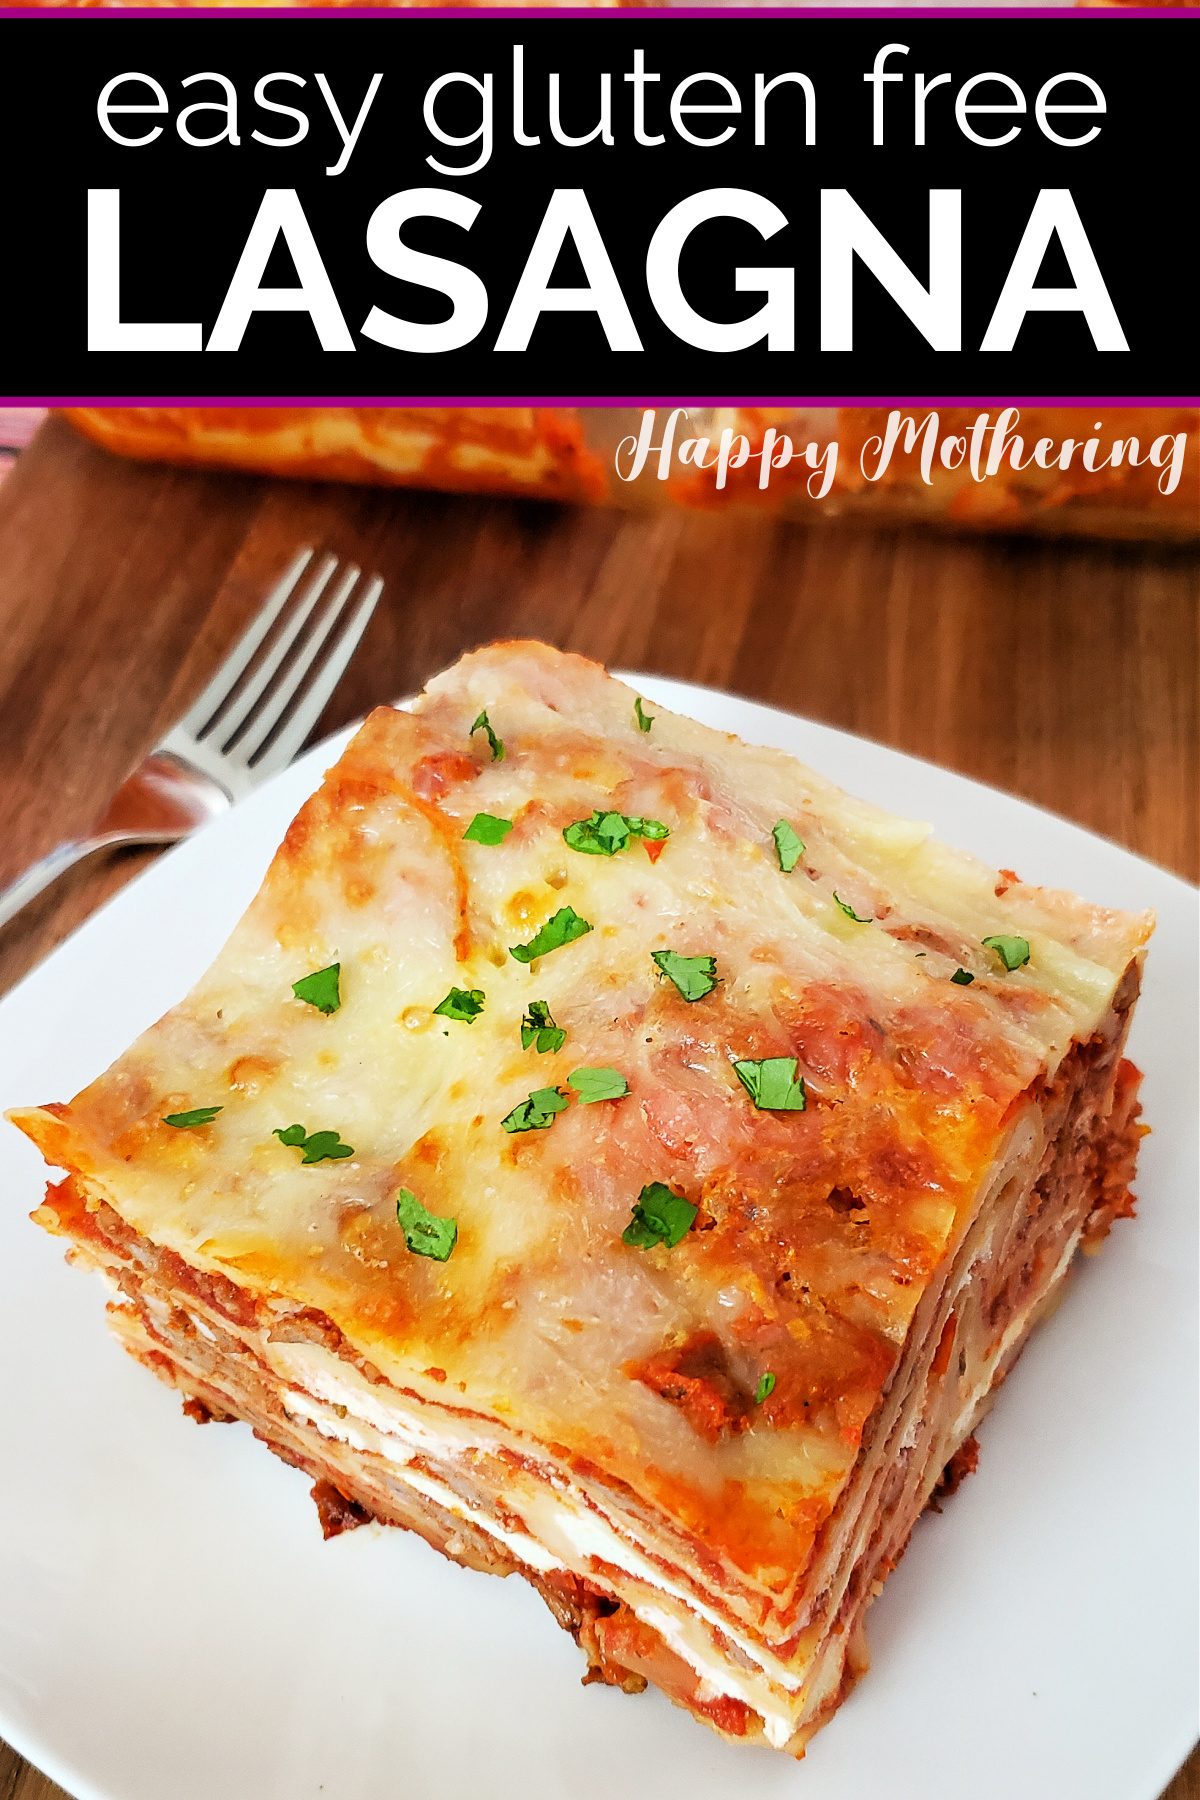 Square of homemade gluten free lasagna served on square white plate and garnished with parsley.